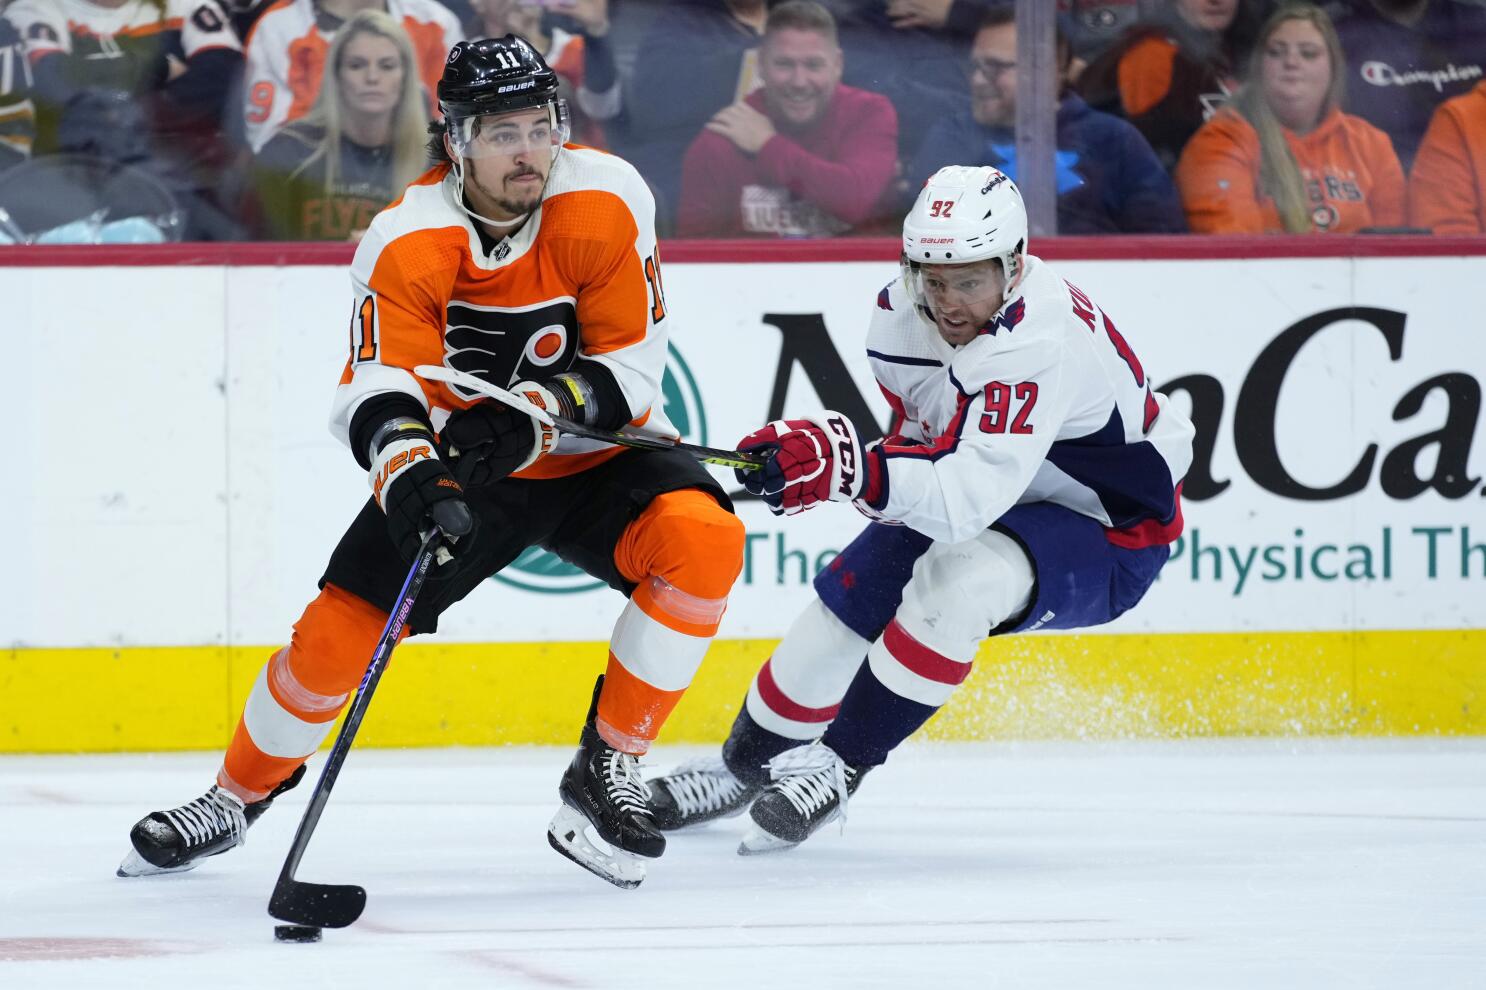 Flyers fall to the Washington Capitals, 5-3, and lose fourth straight